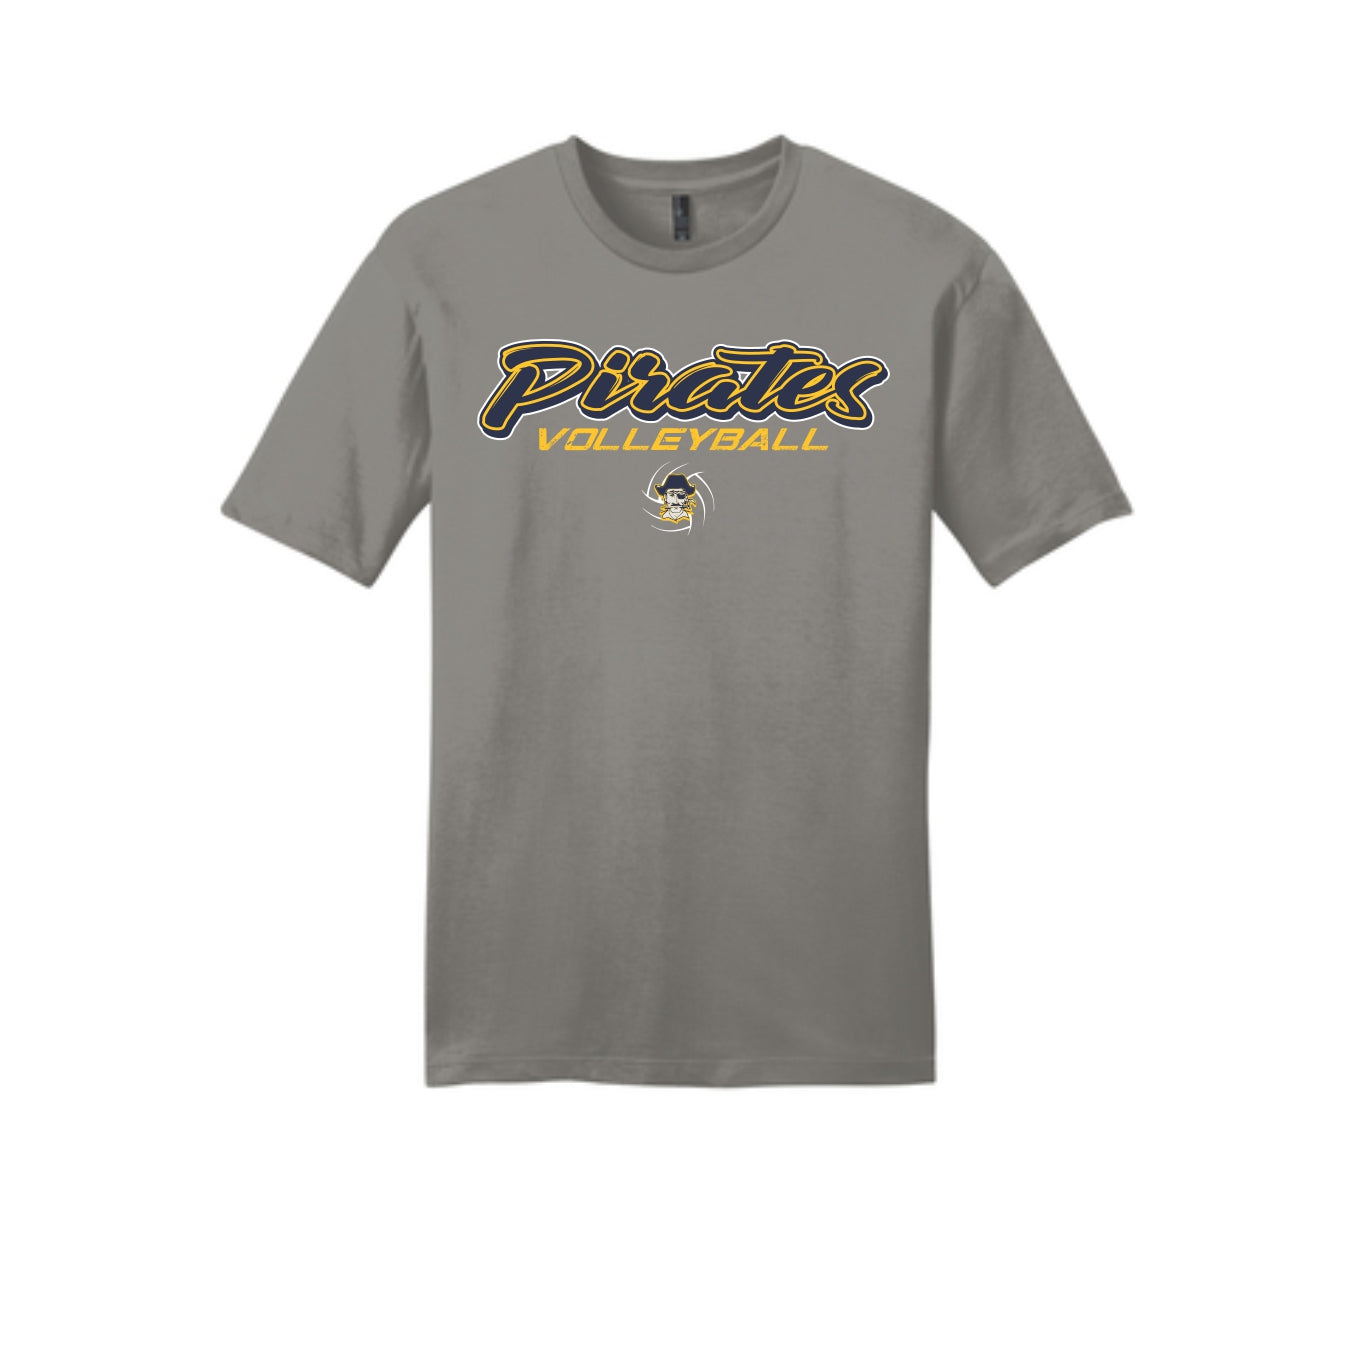 Pirate Volleyball - Comfort T-Shirt - Adult/Youth